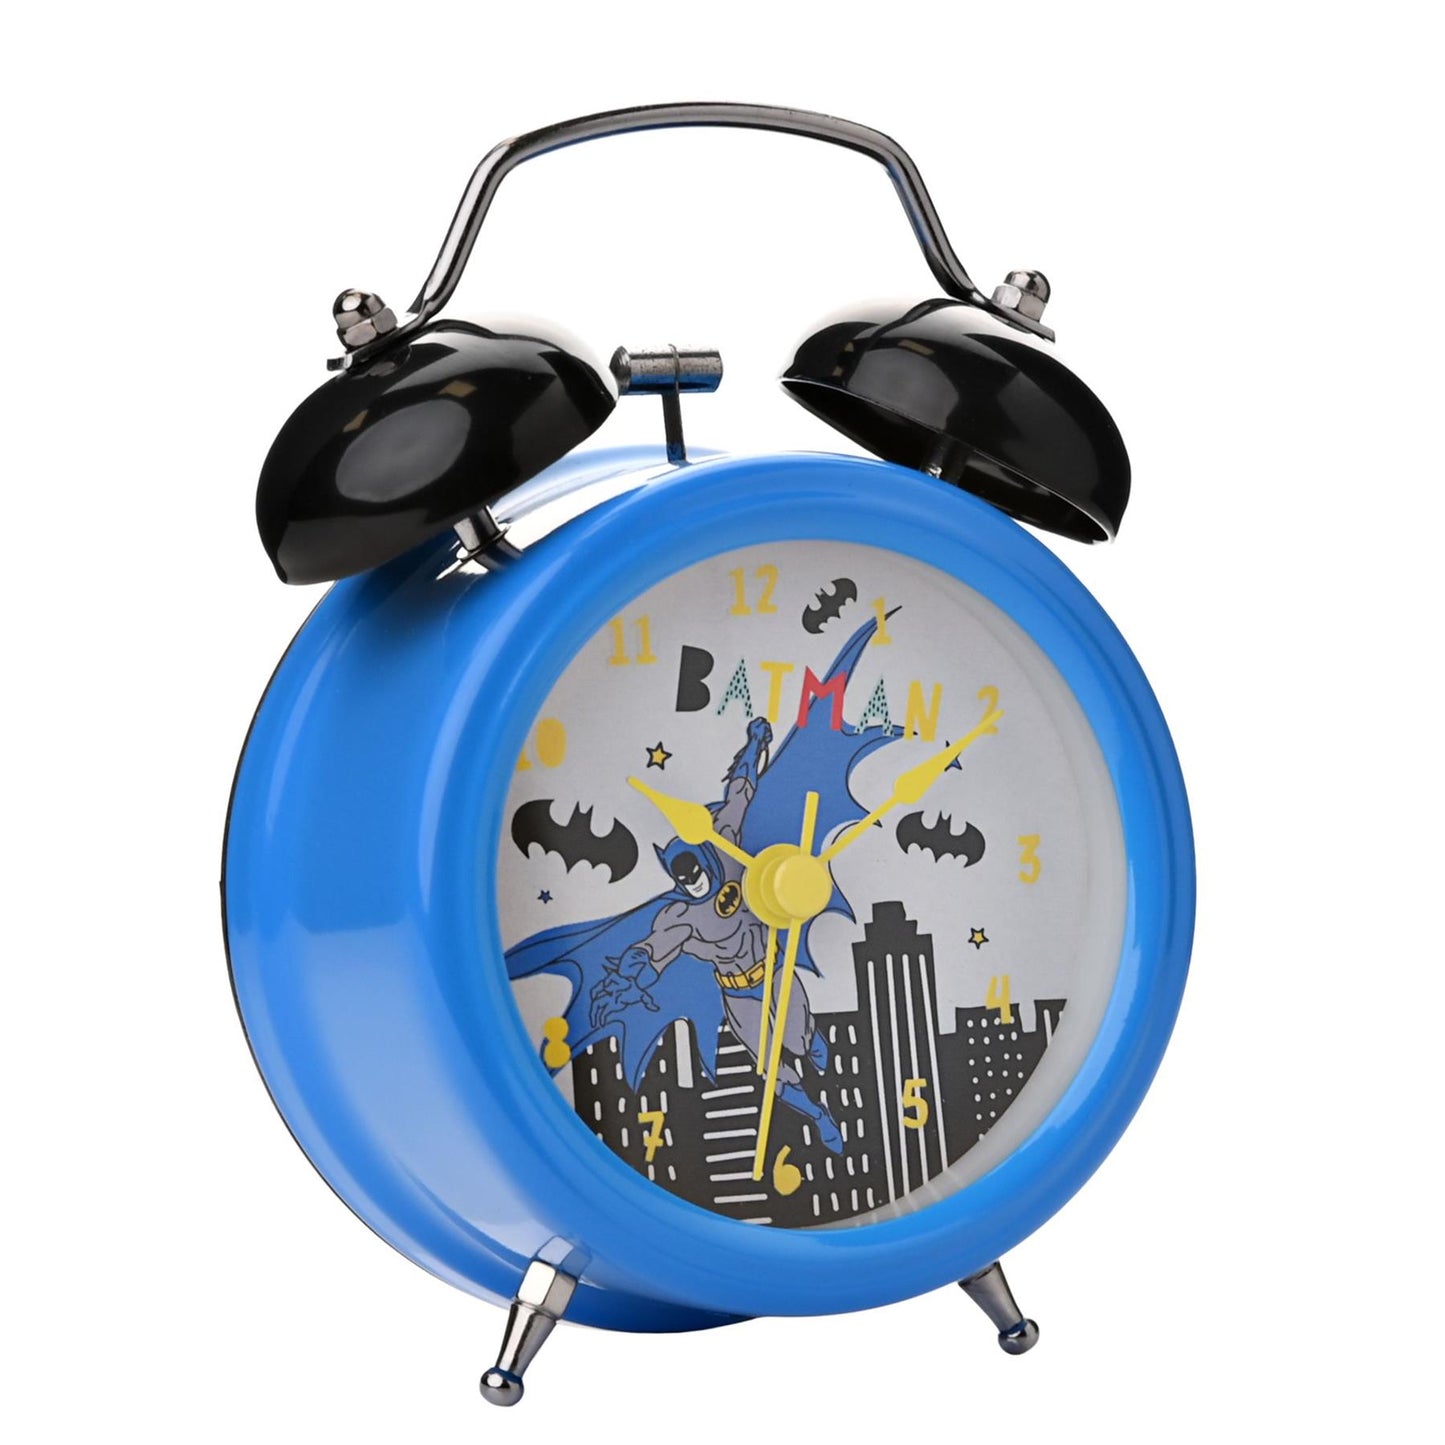 Wm.Widdop Childrens Bell Alarm Clock WB10 Available Multiple Colour